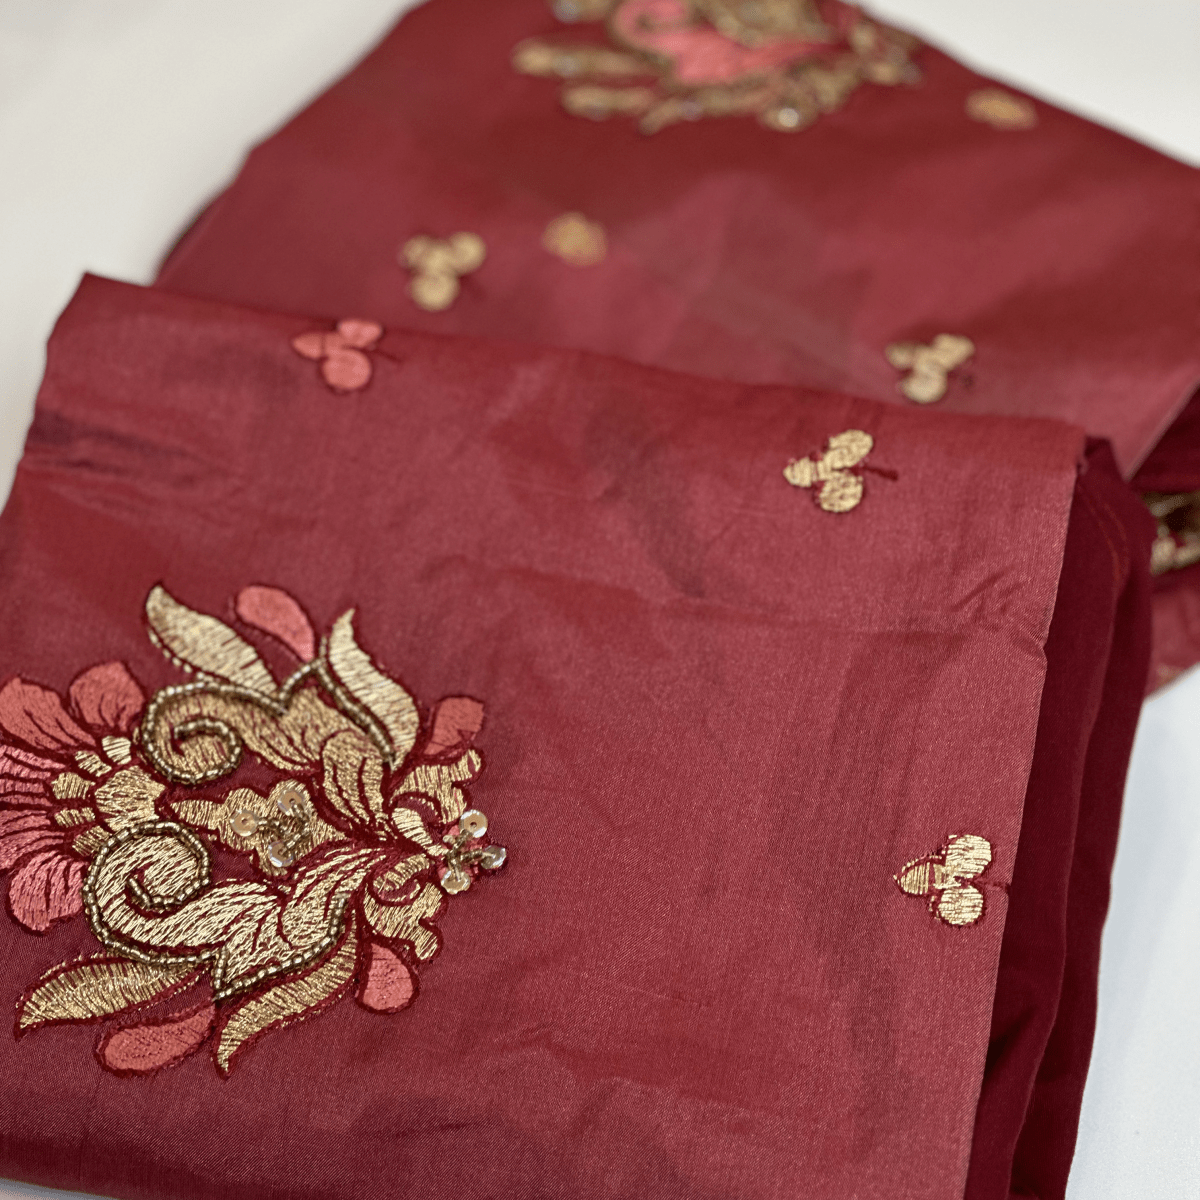 Fancy &amp; Adorned Handmade Sari Aprons-Mauve with Ornate Hand Embroidered Design 